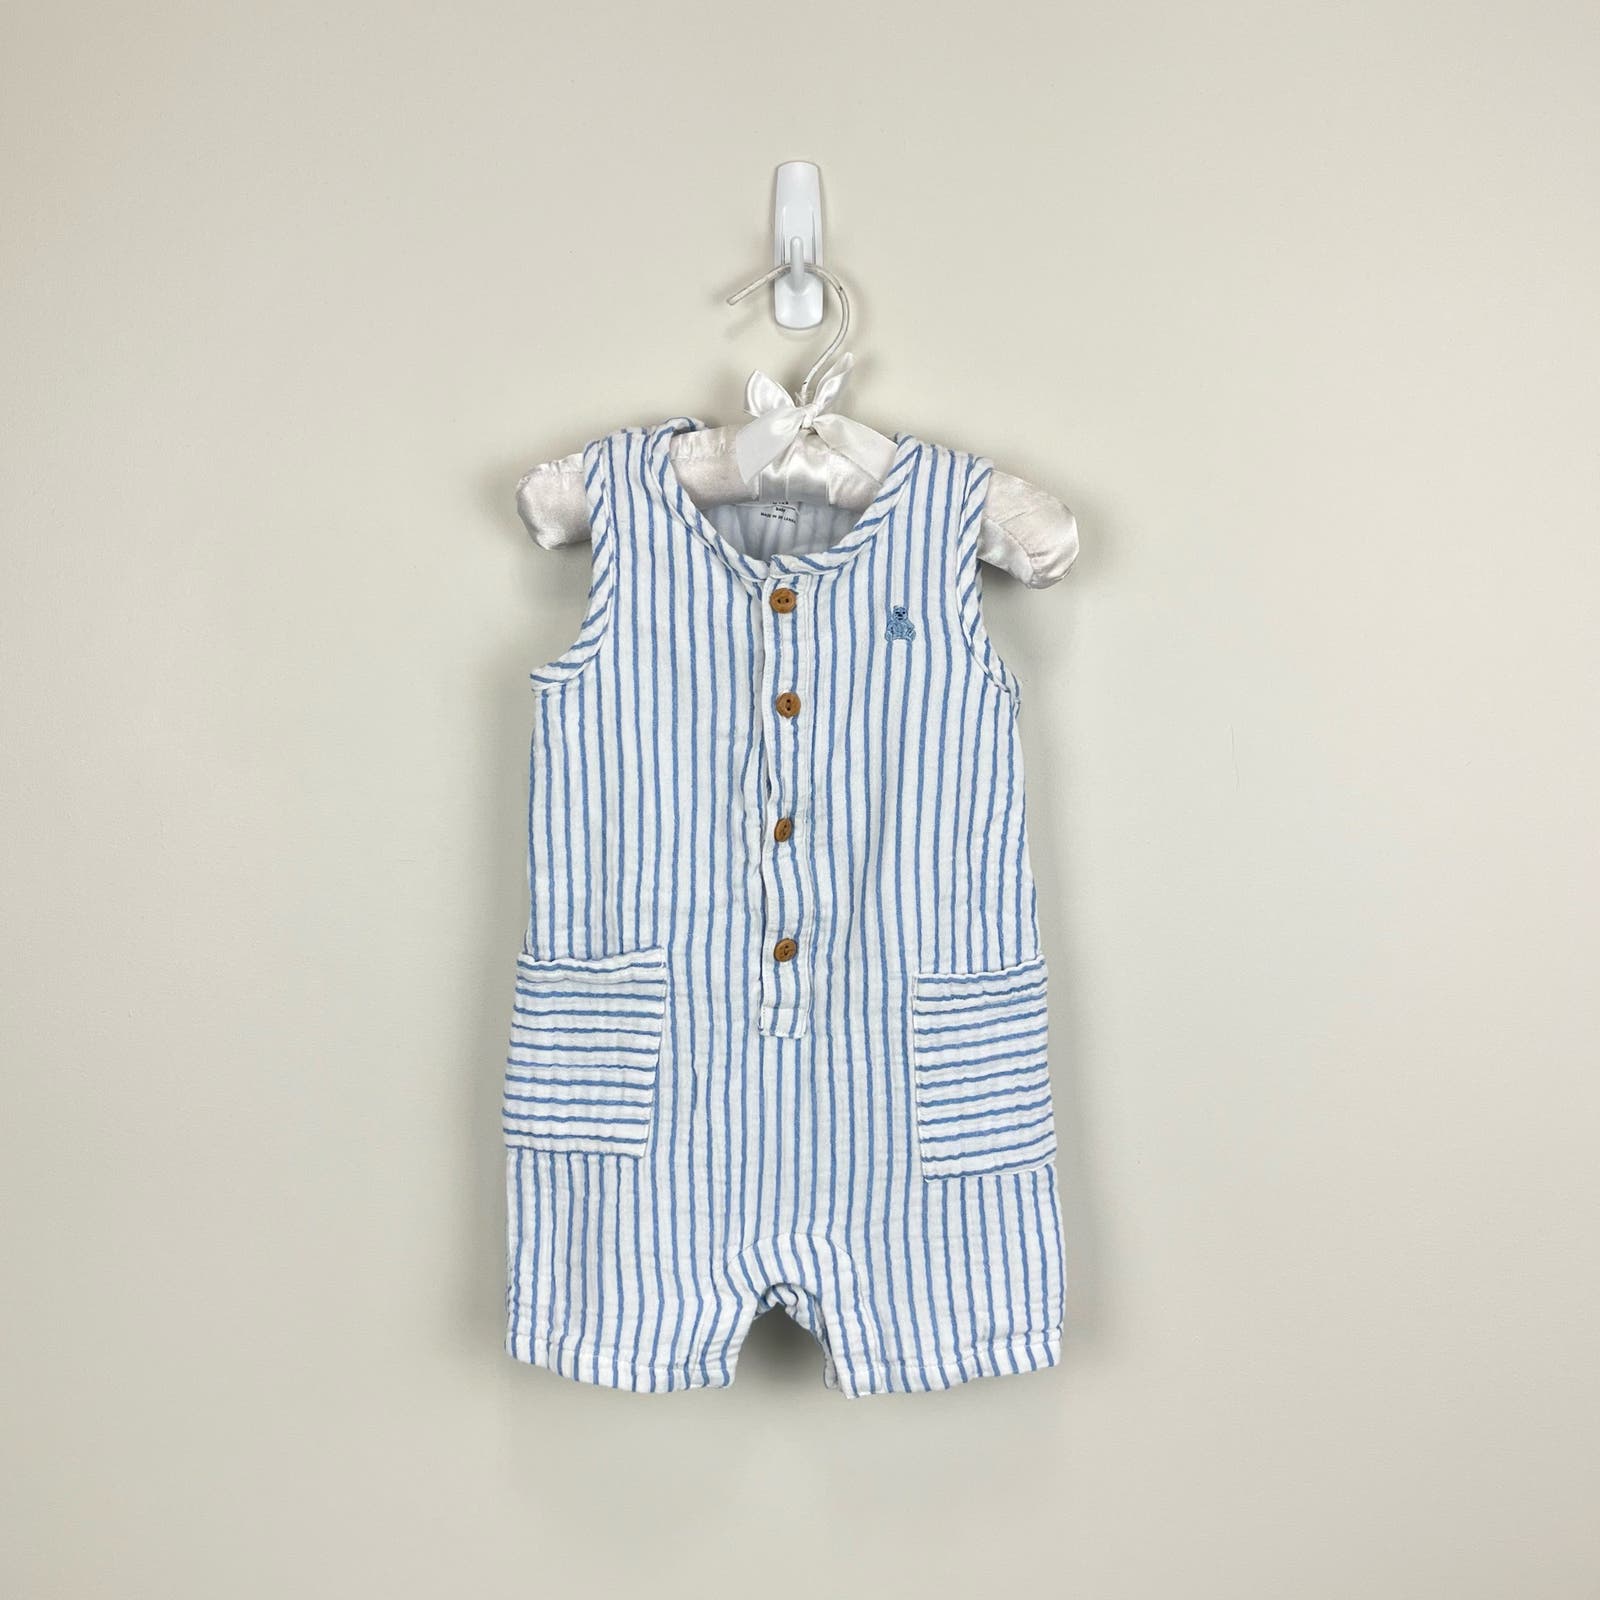 Baby Gap Blue and White Striped Shortie Romper 18-24 Months